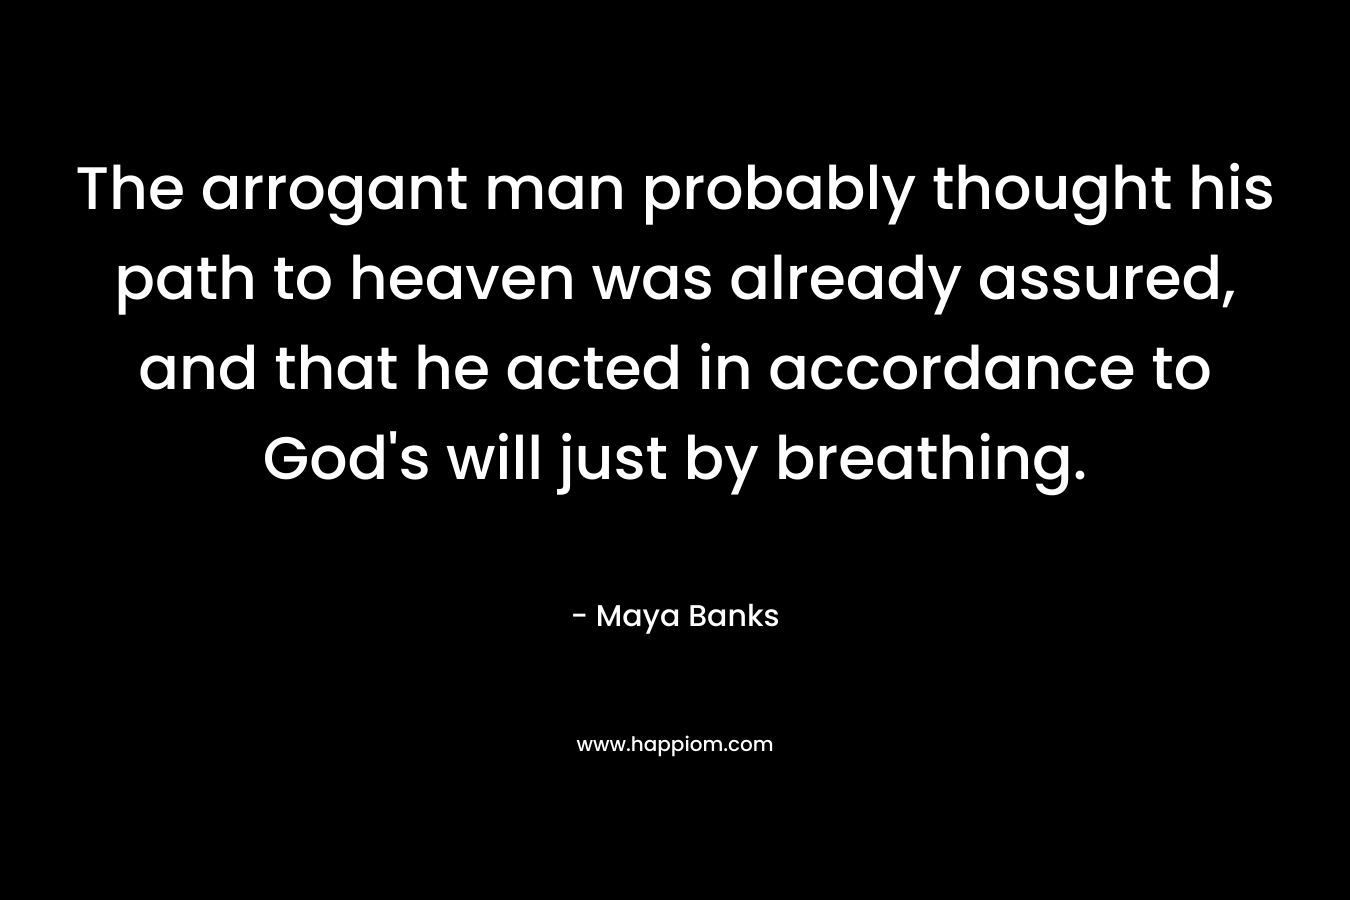 The arrogant man probably thought his path to heaven was already assured, and that he acted in accordance to God’s will just by breathing. – Maya Banks